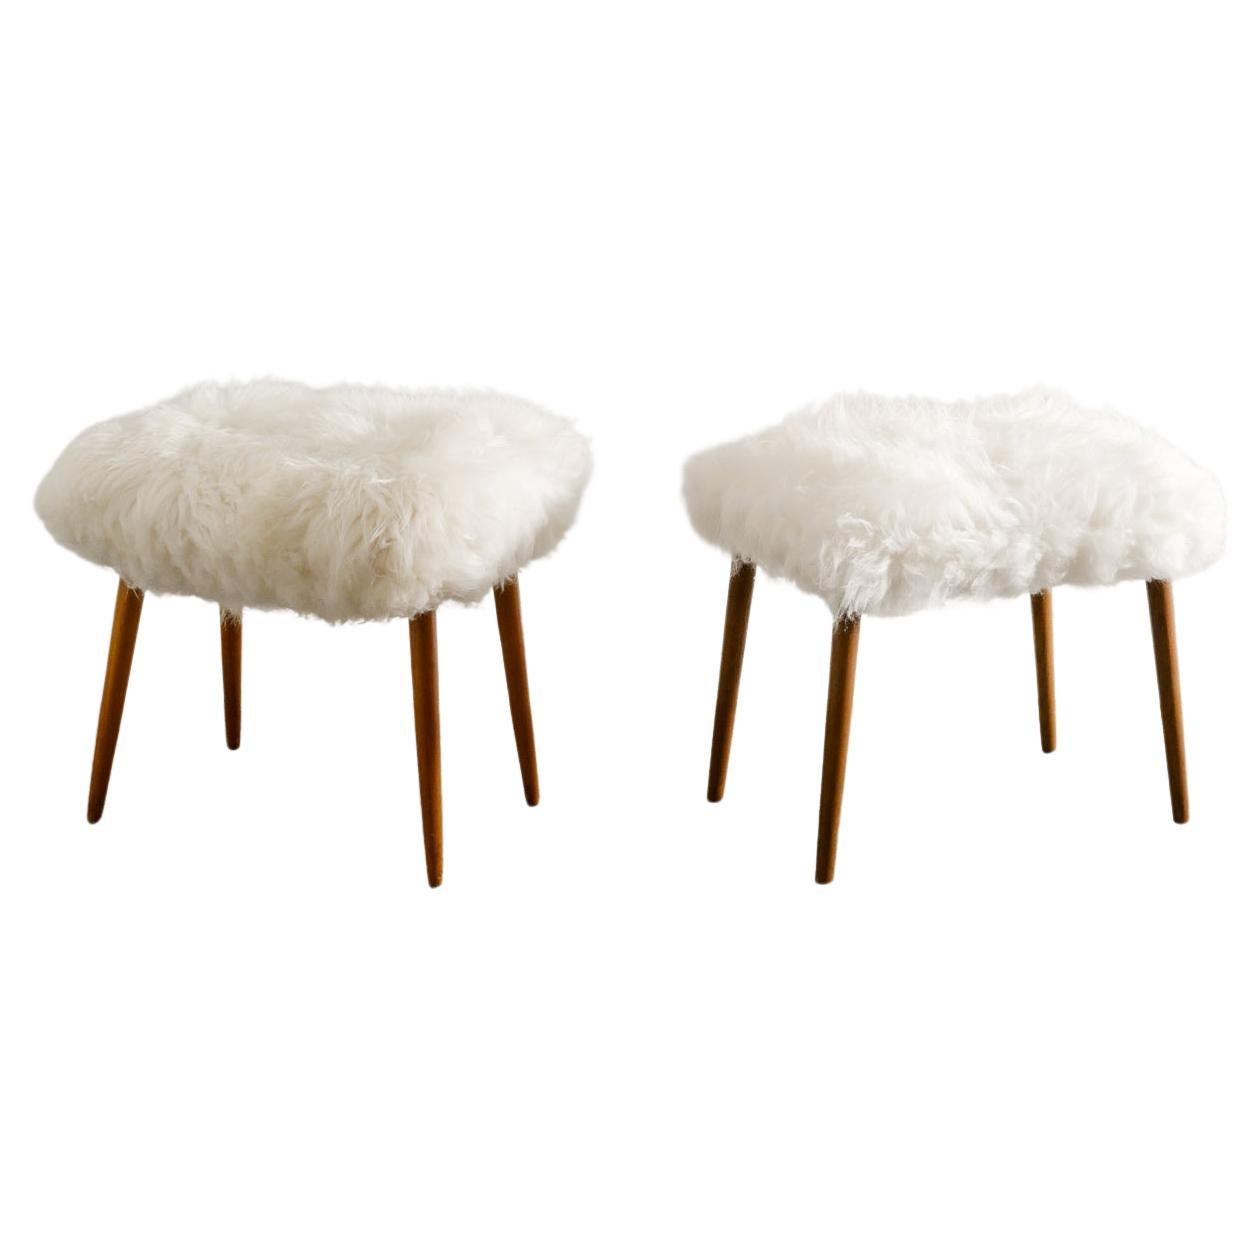 Pair of Swedish Stools in Beech and Sheepskin Produced in Sweden, 1970s